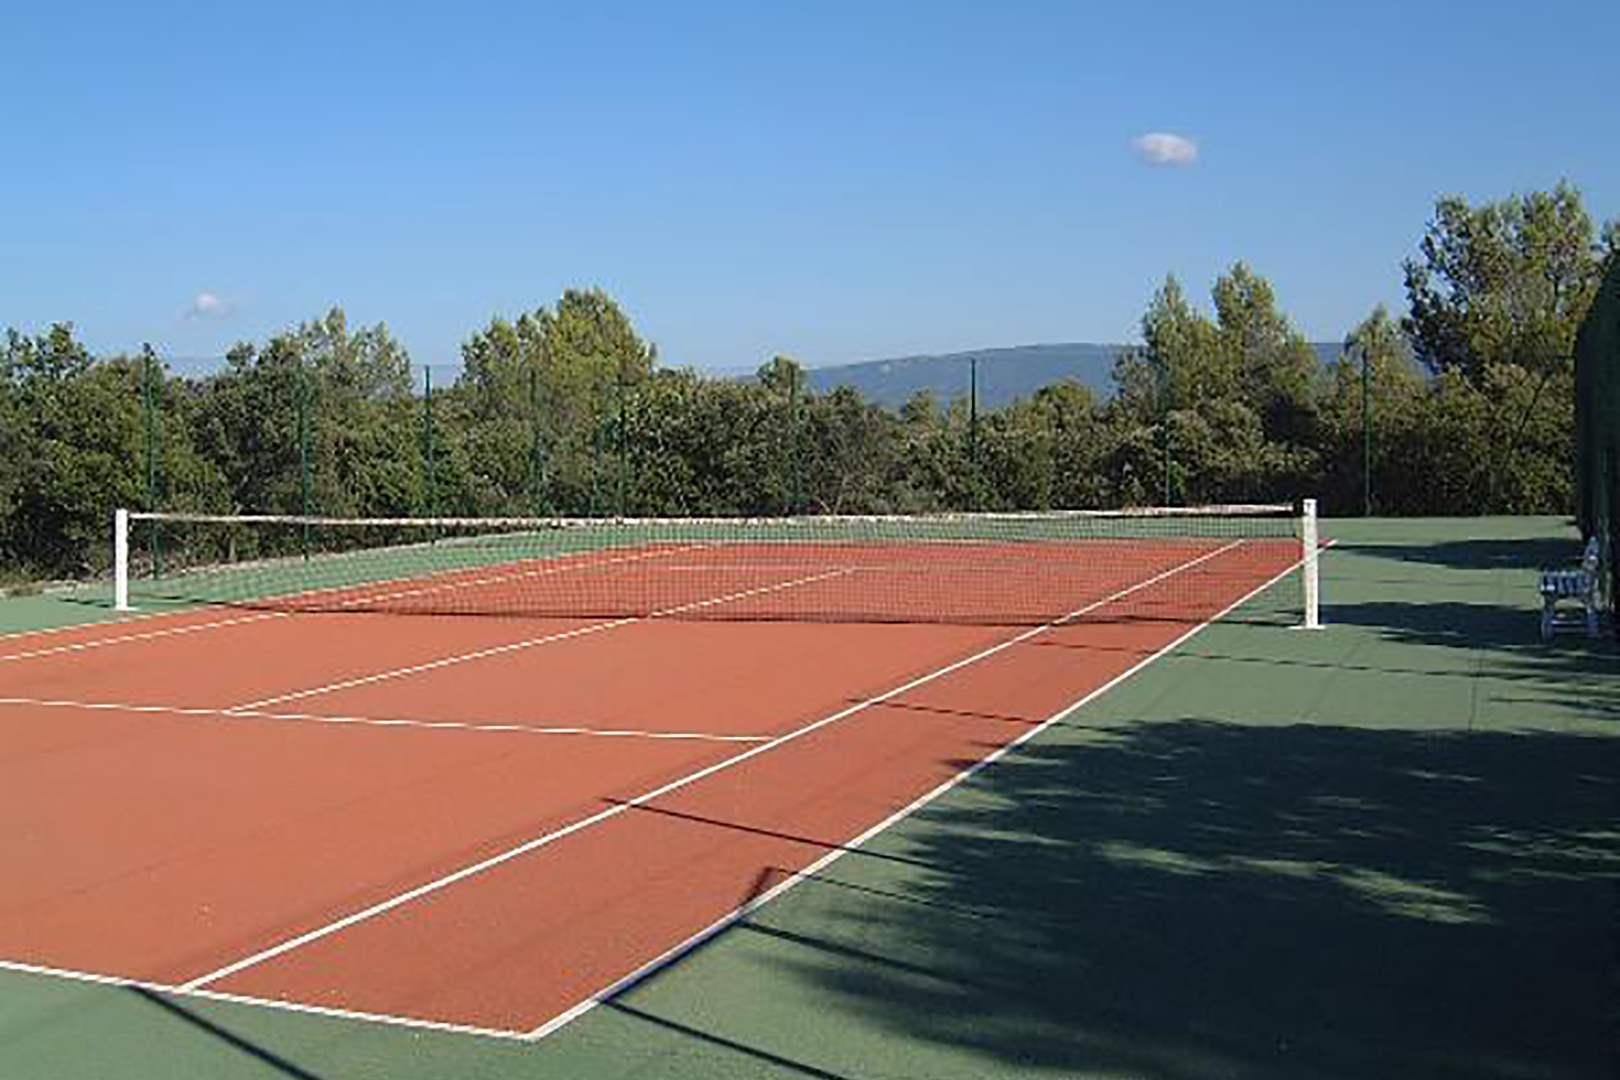 Private tennis court with synthetic quick dry surface